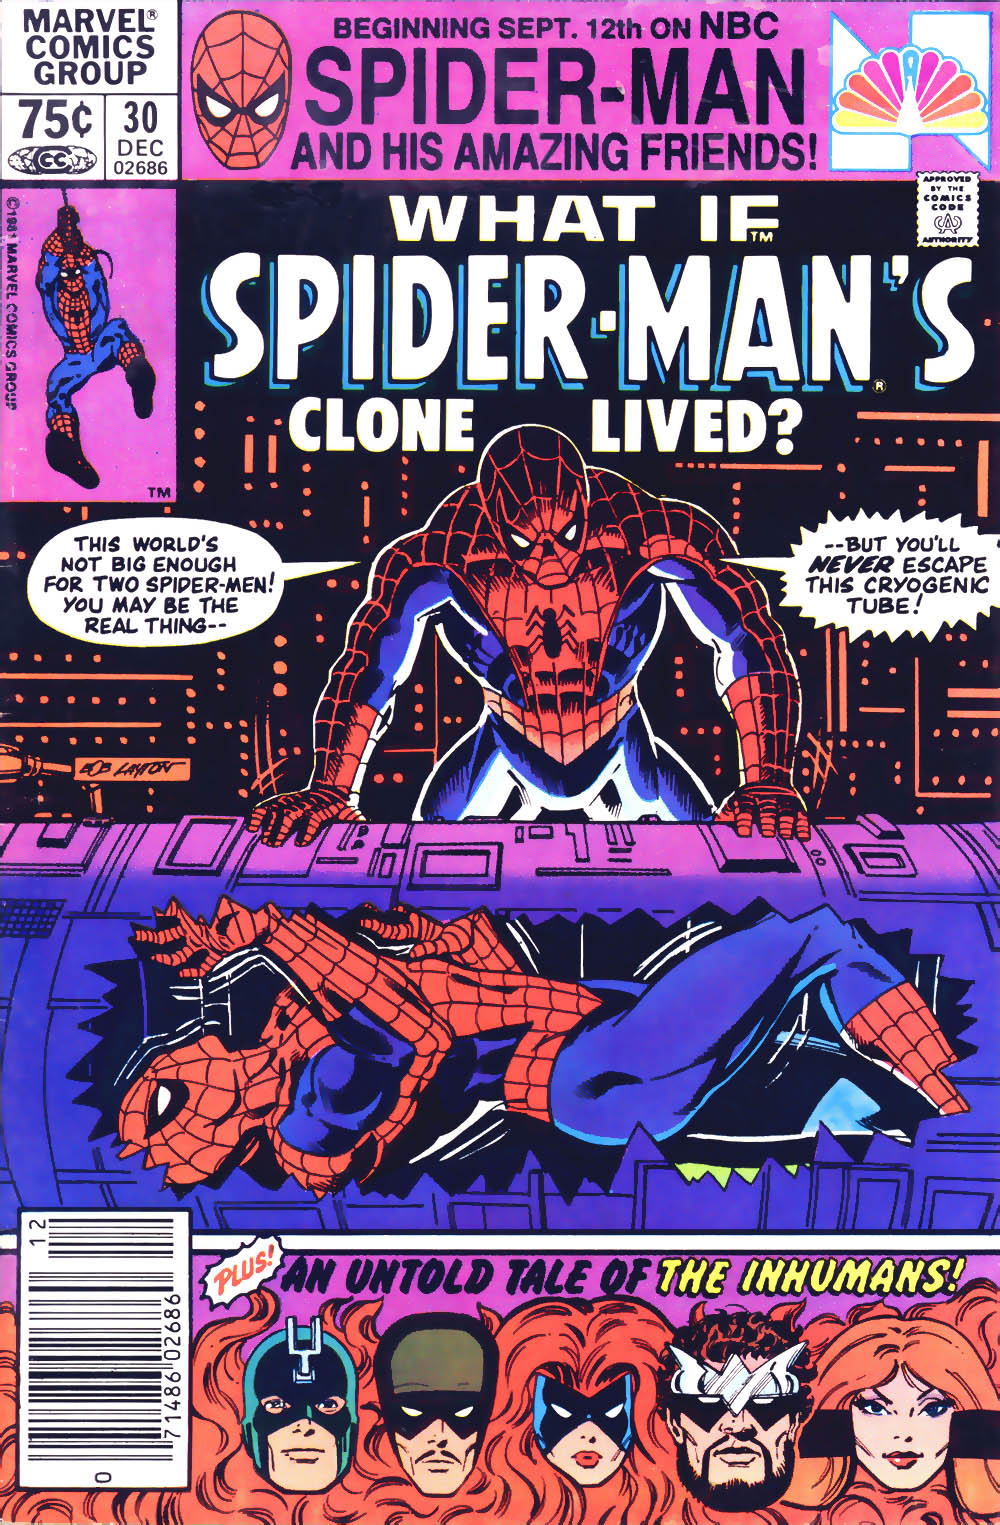 Spidermans clone had lived